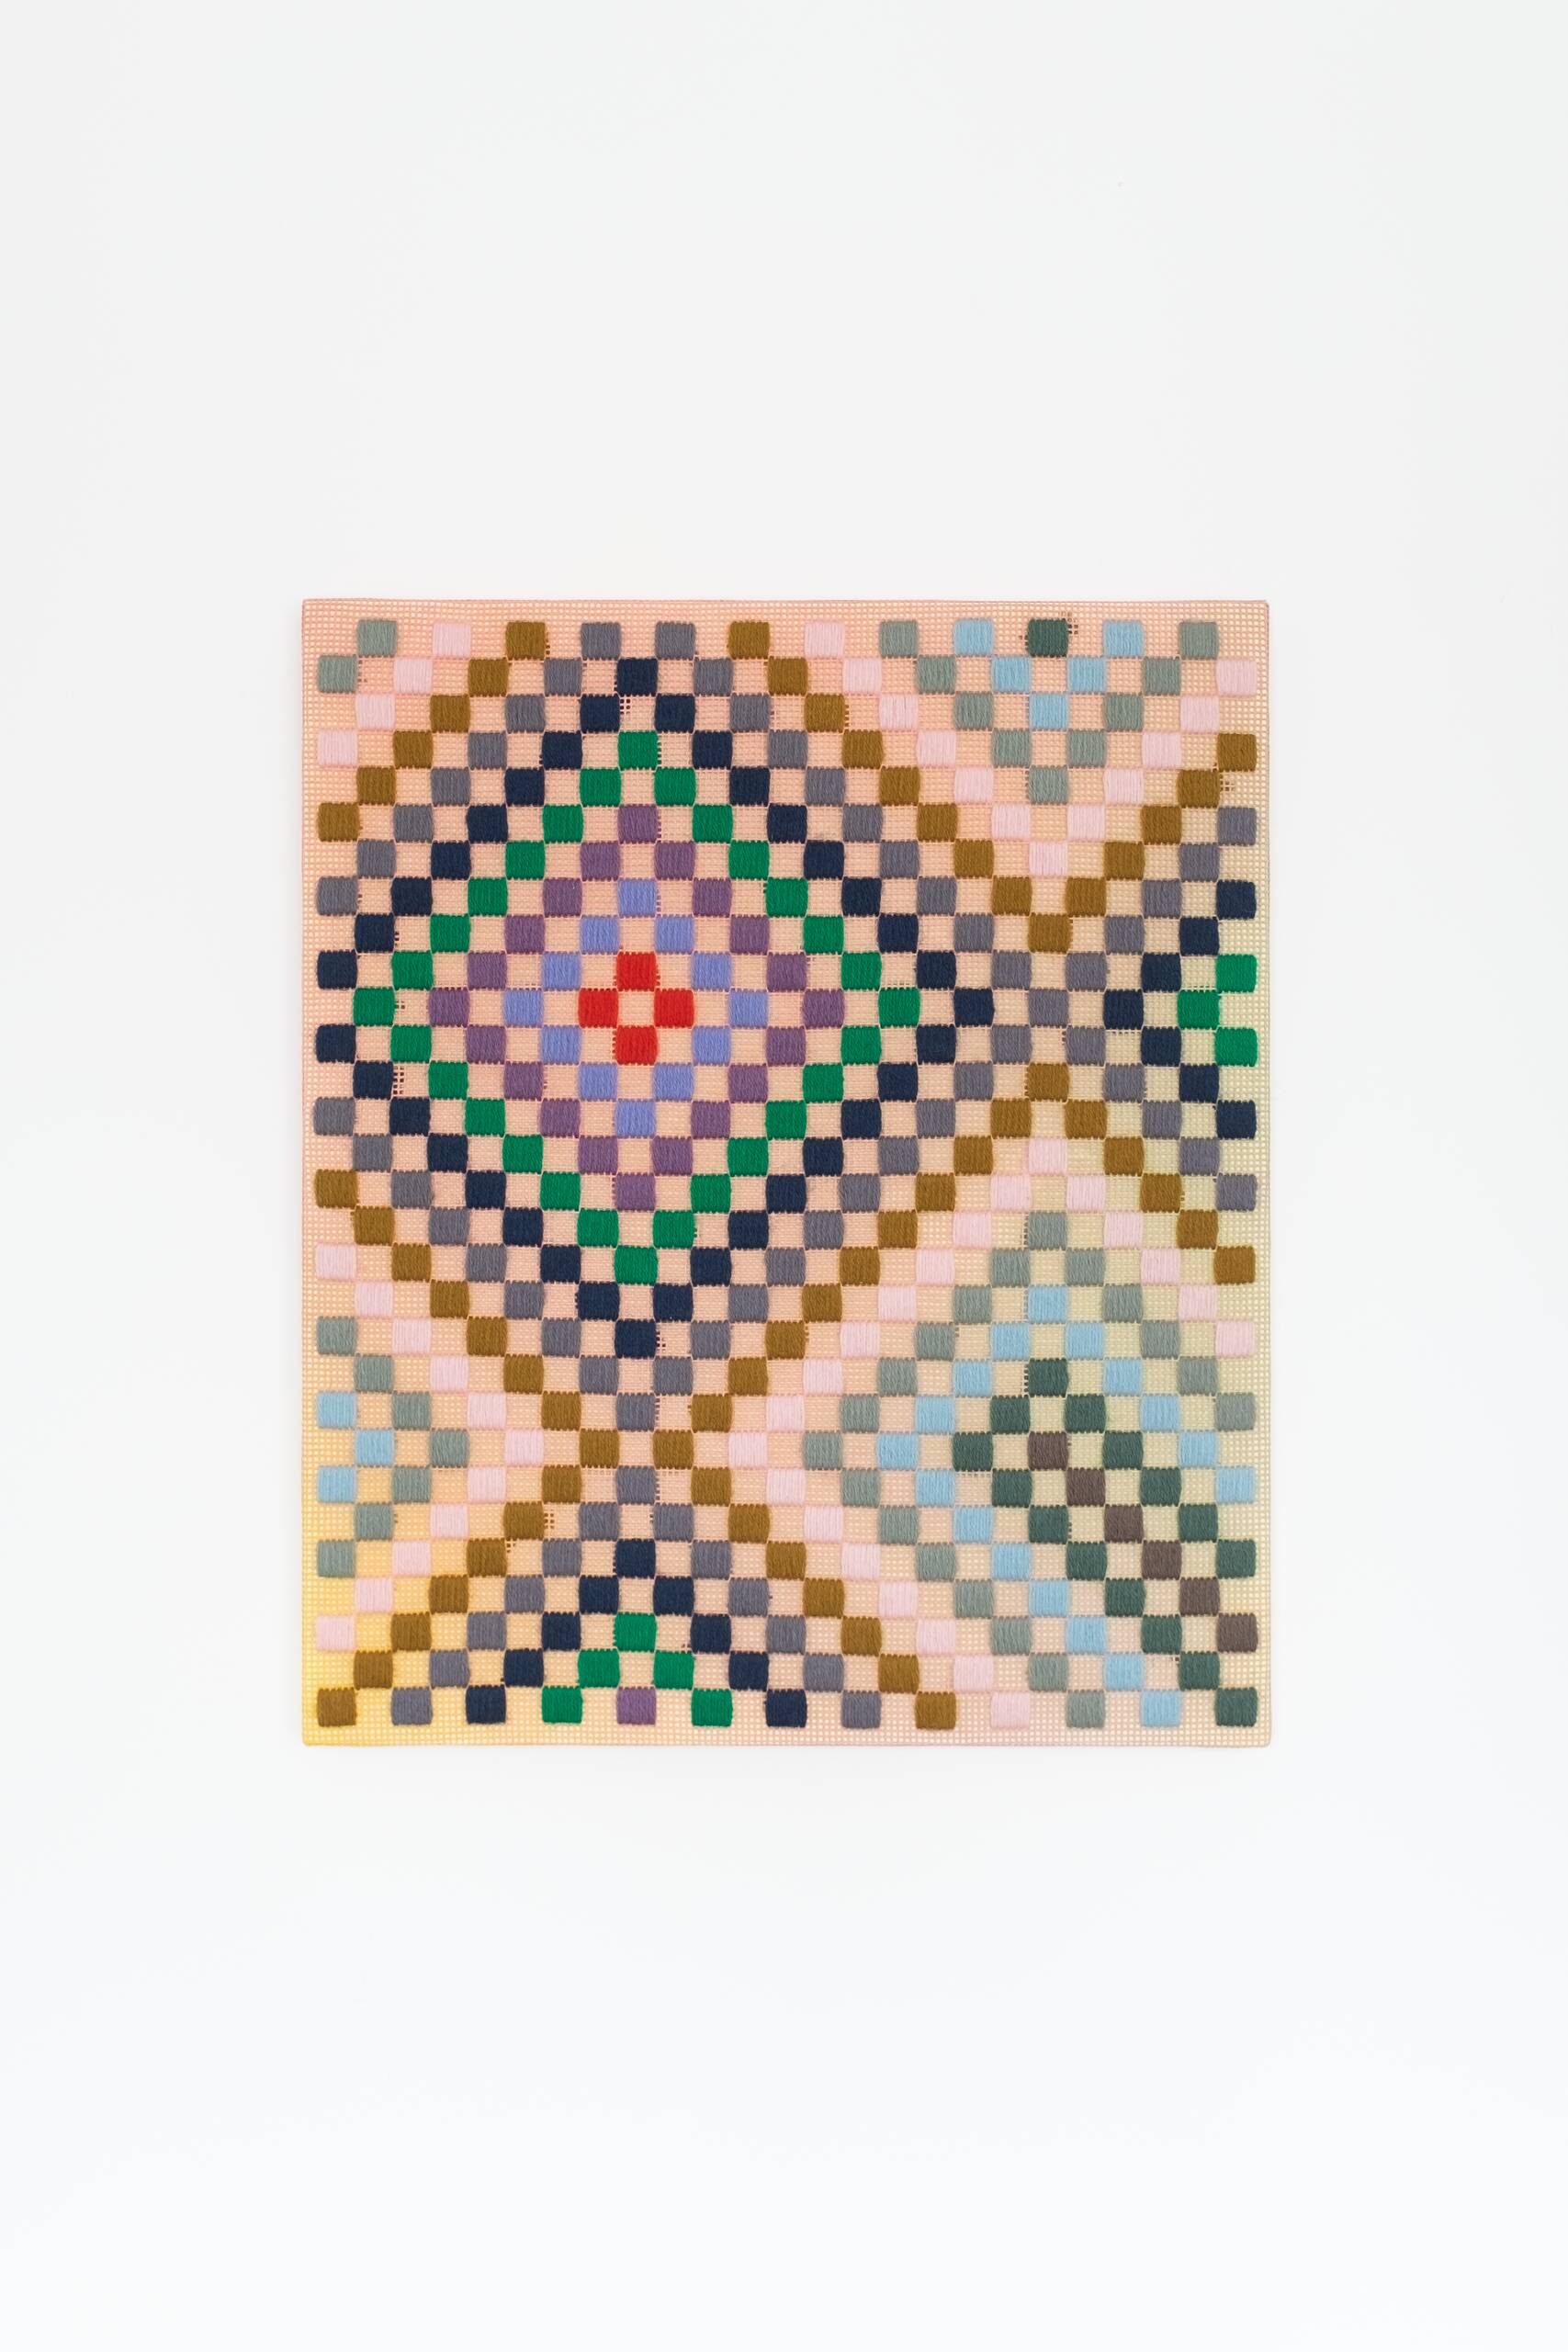 Punch card -- Patchwork [teal], Hand-embroidered wool yarn and acrylic paint on canvas, 2022